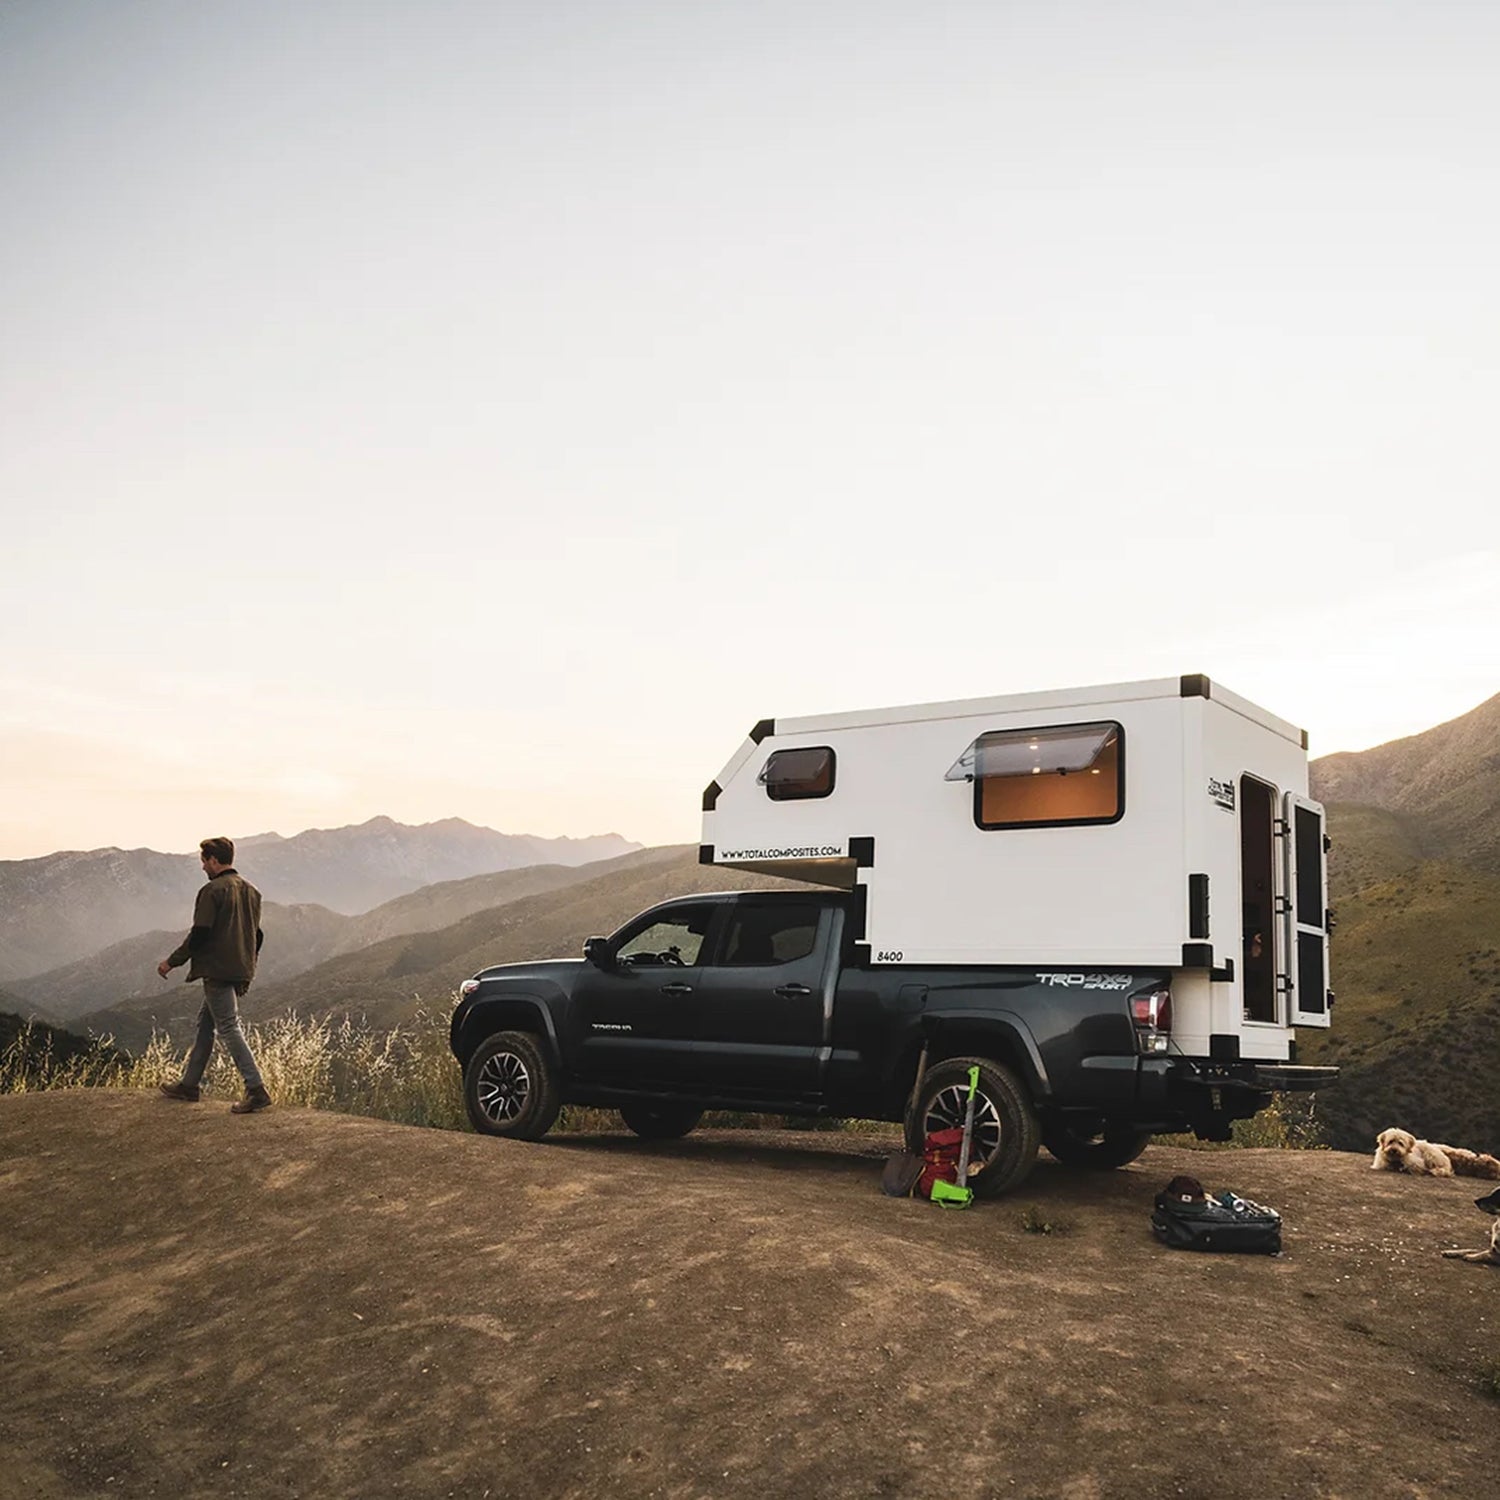 Frequent Campers Love This Outdoor Gear at